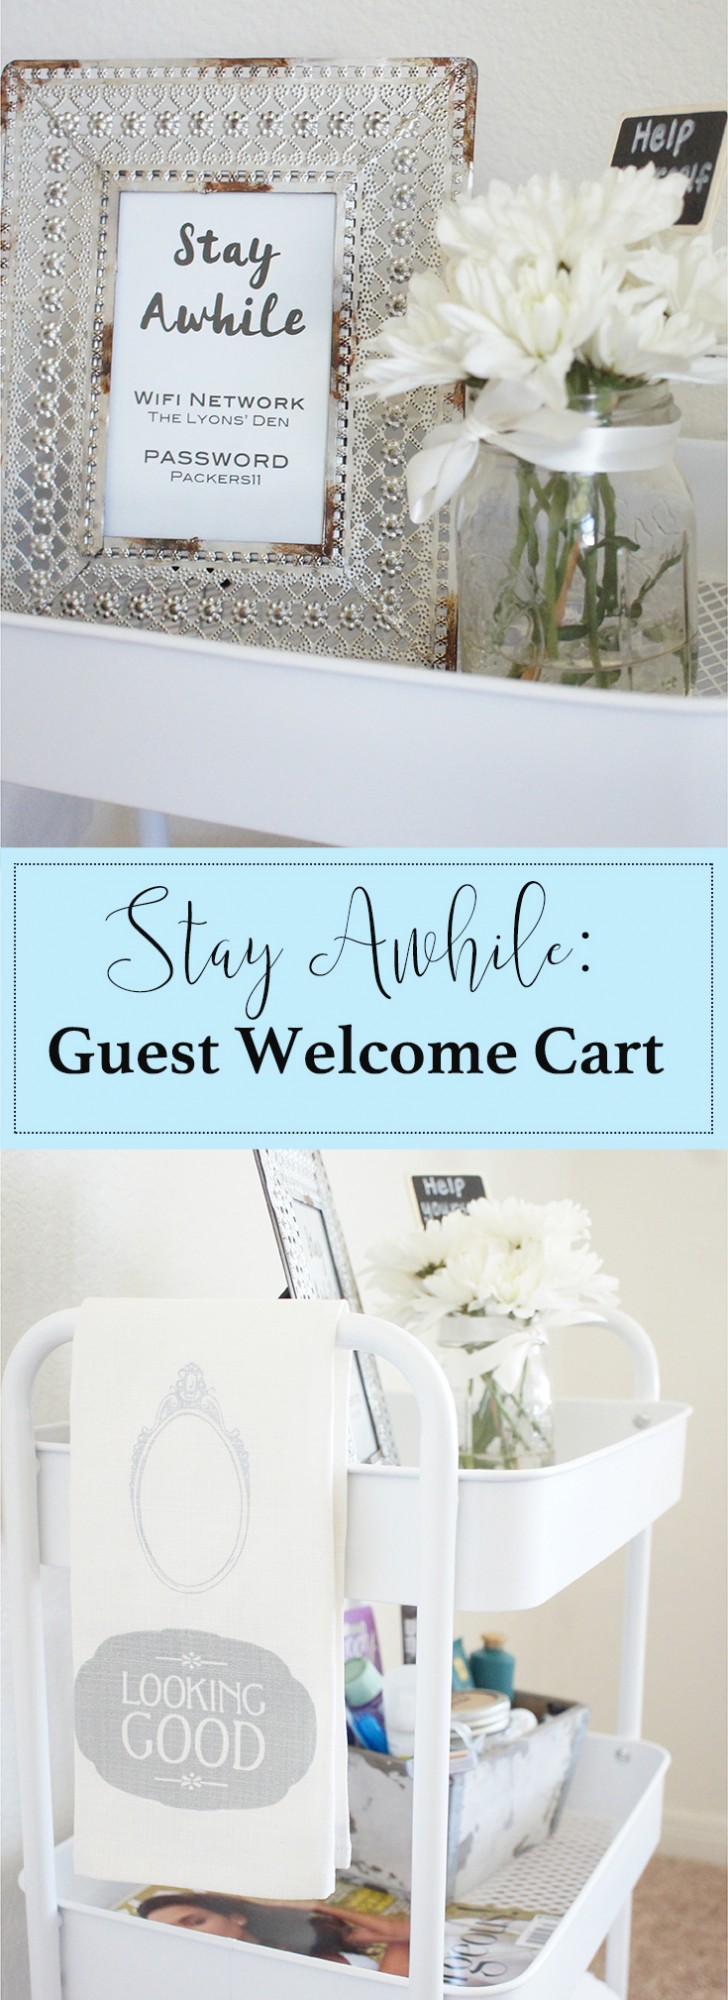 Welcome your guests and make them feel at home with this pretty hospitality cart!